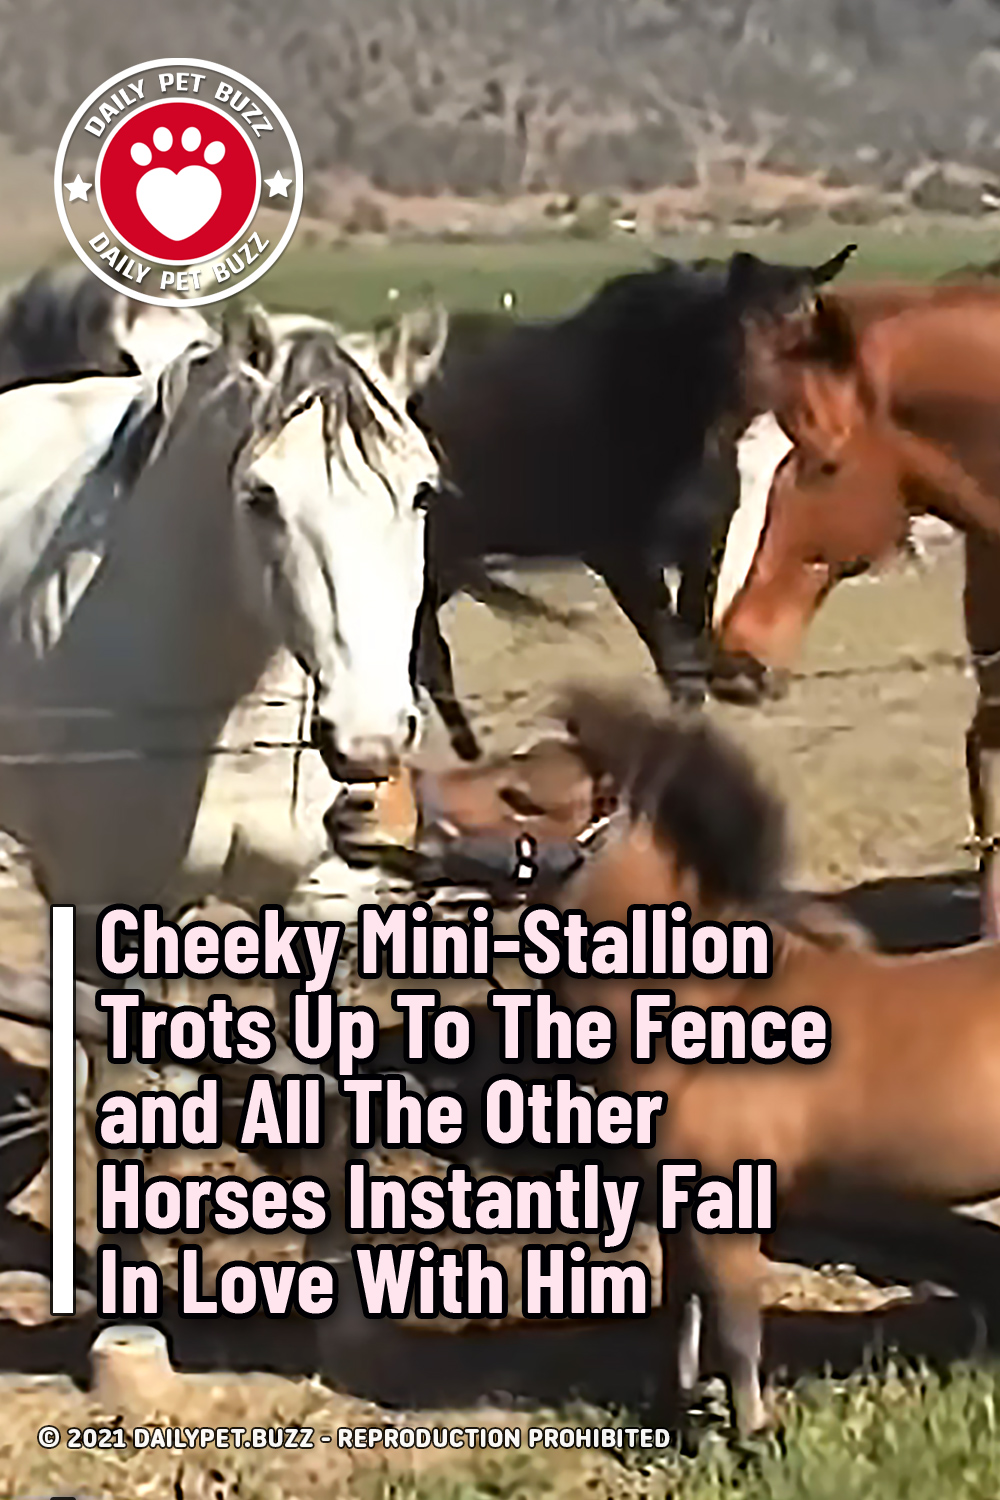 Cheeky Mini-Stallion Trots Up To The Fence and All The Horses Fall In Love With Him